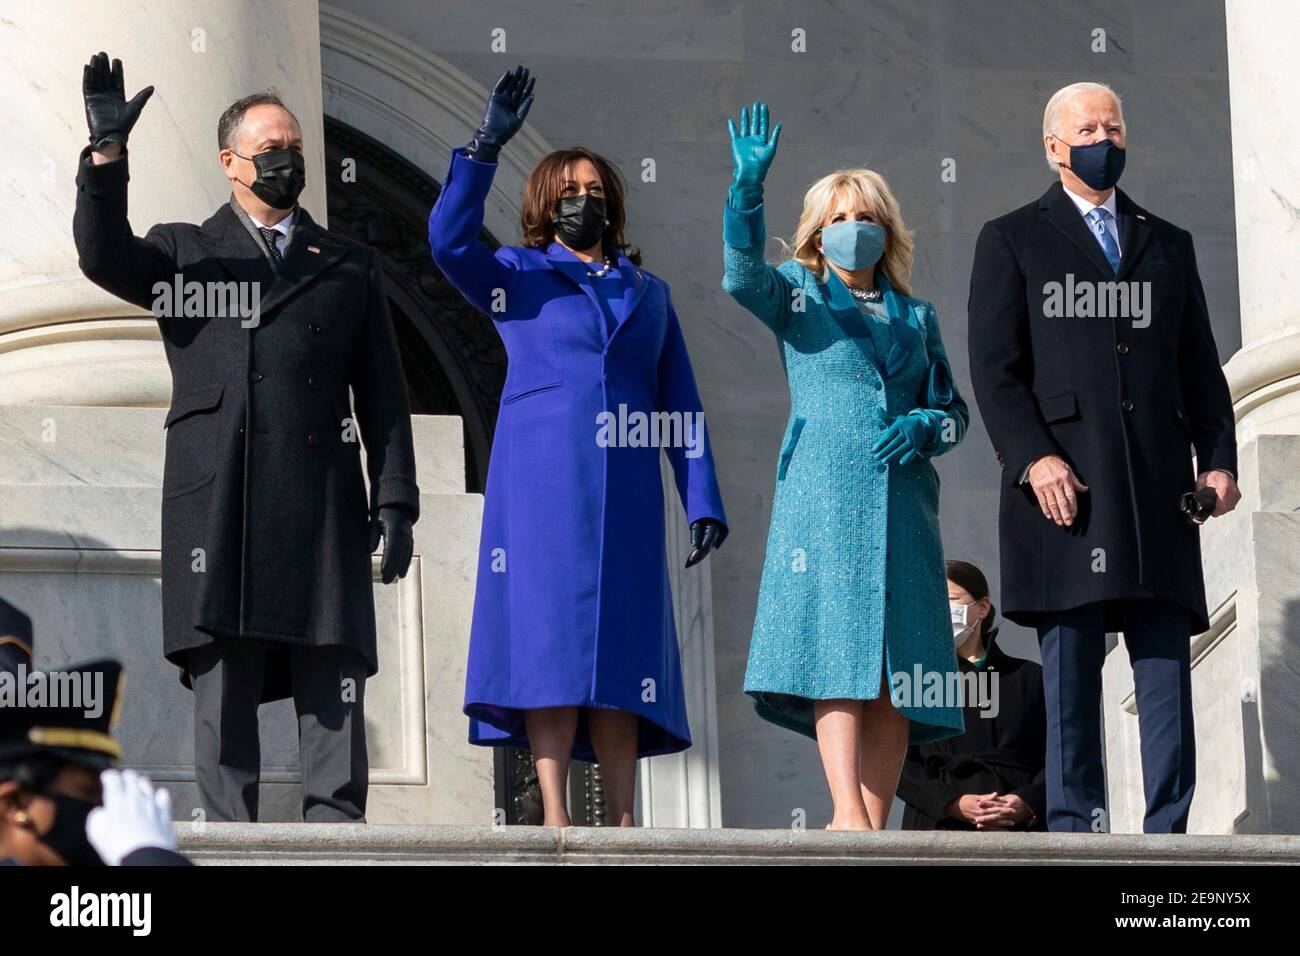 U.S President elect Joe Biden and Vice President elect Kamala Harris wave from the capitol steps as they arrive for Inauguration Day January 20, 2021 in Washington, DC. Standing from left to right are: Doug Emhoff, Vice President-elect Kamala Harris, Dr. Jill Biden and President-elect Joe Biden. Stock Photo